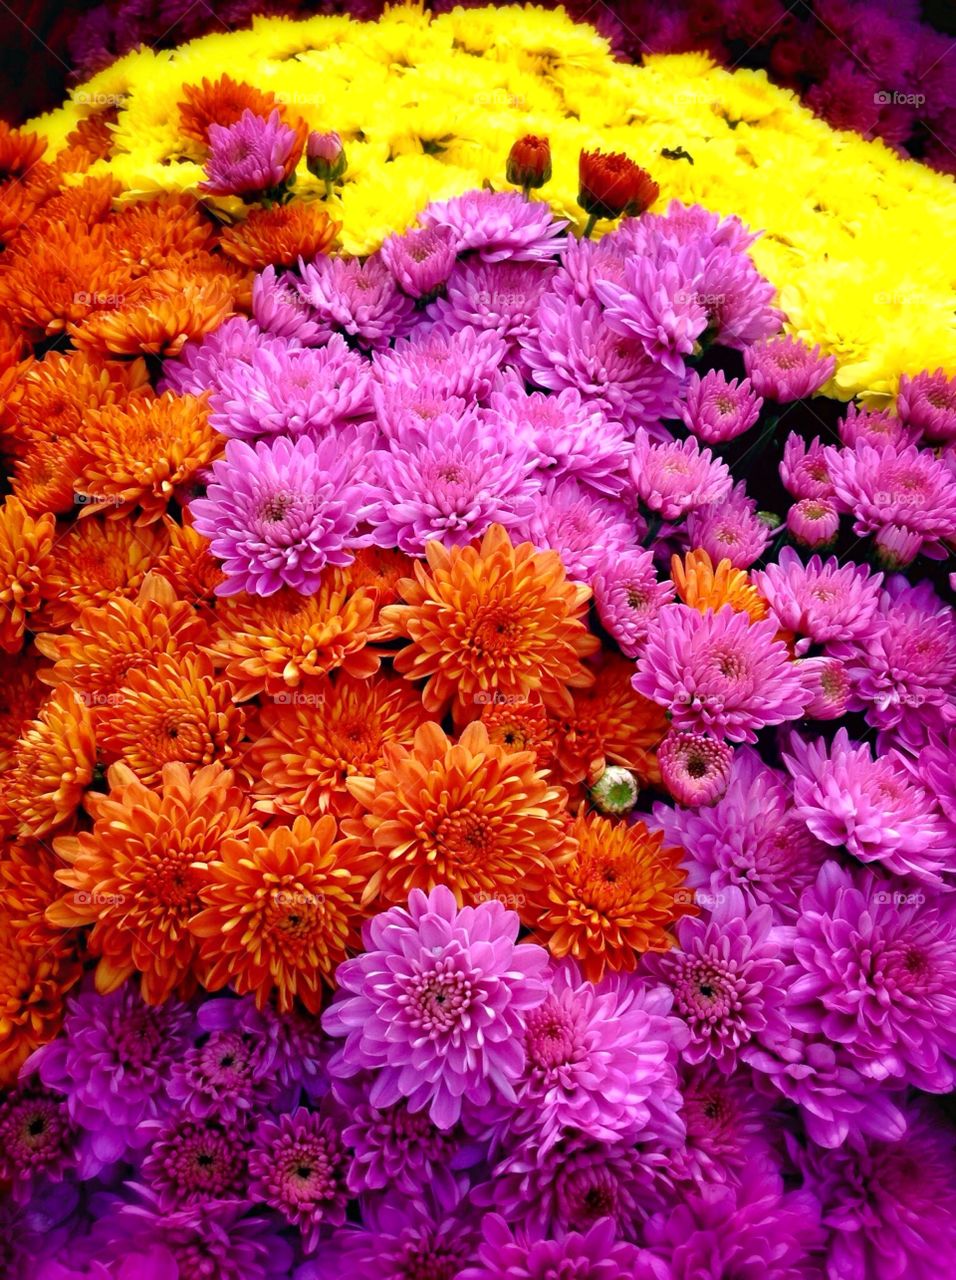 Mums. A colourful bunch of flowers.